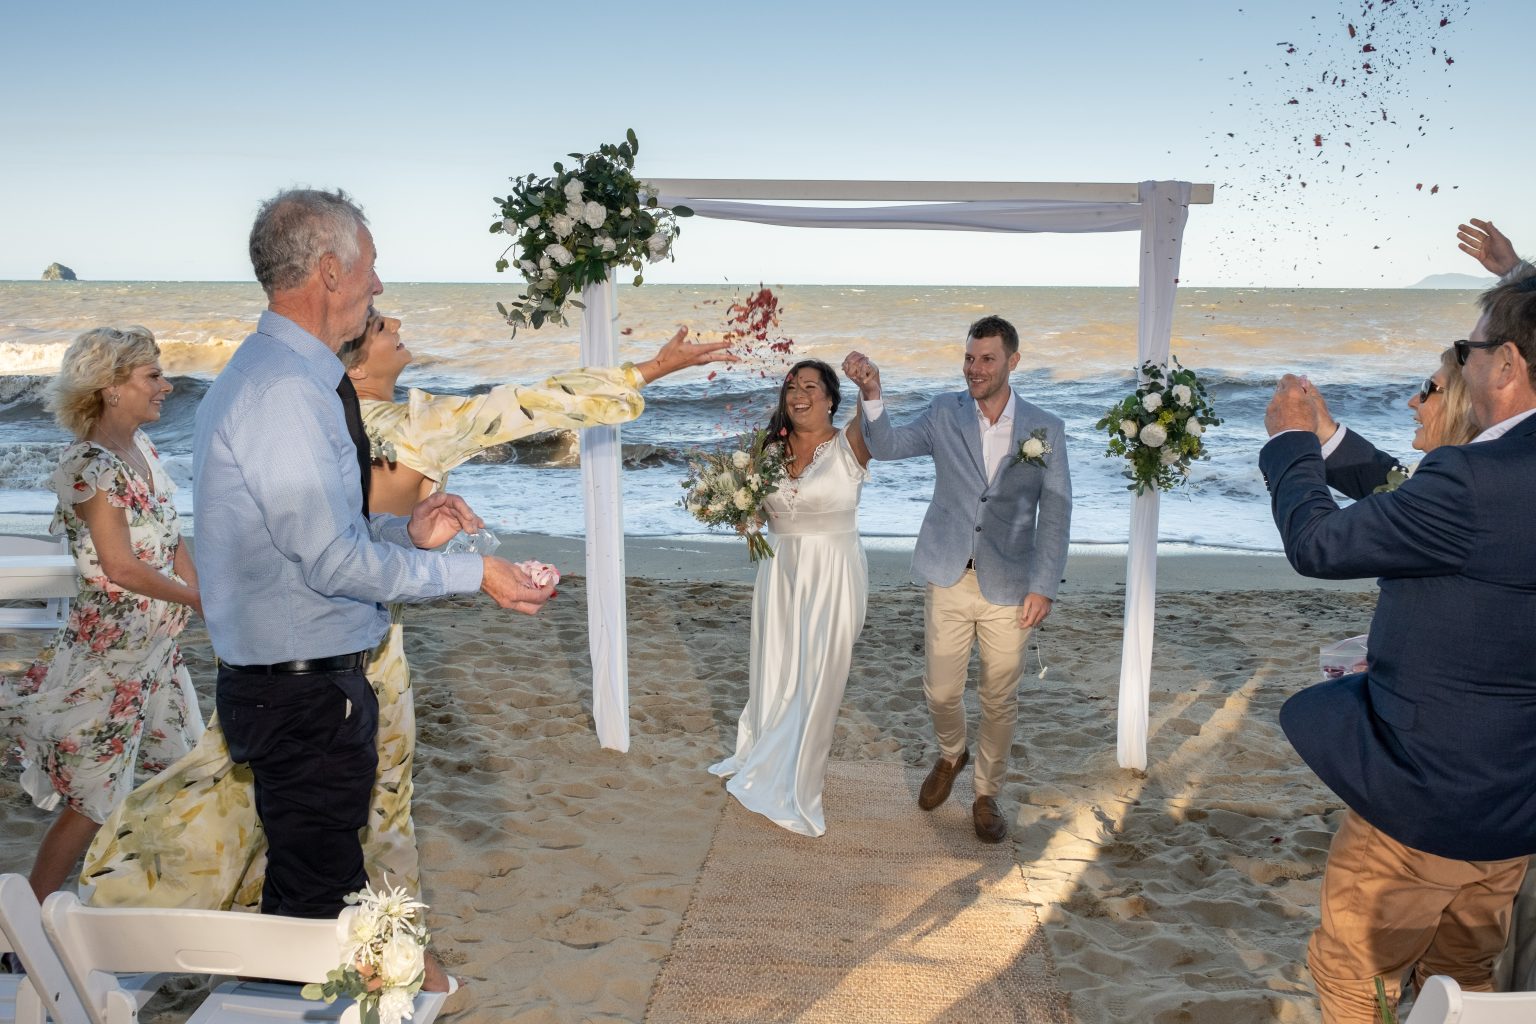 Melaleuca Resort - Palm cove weddings - bride and groom right in front of beach and people throwing flower pedals